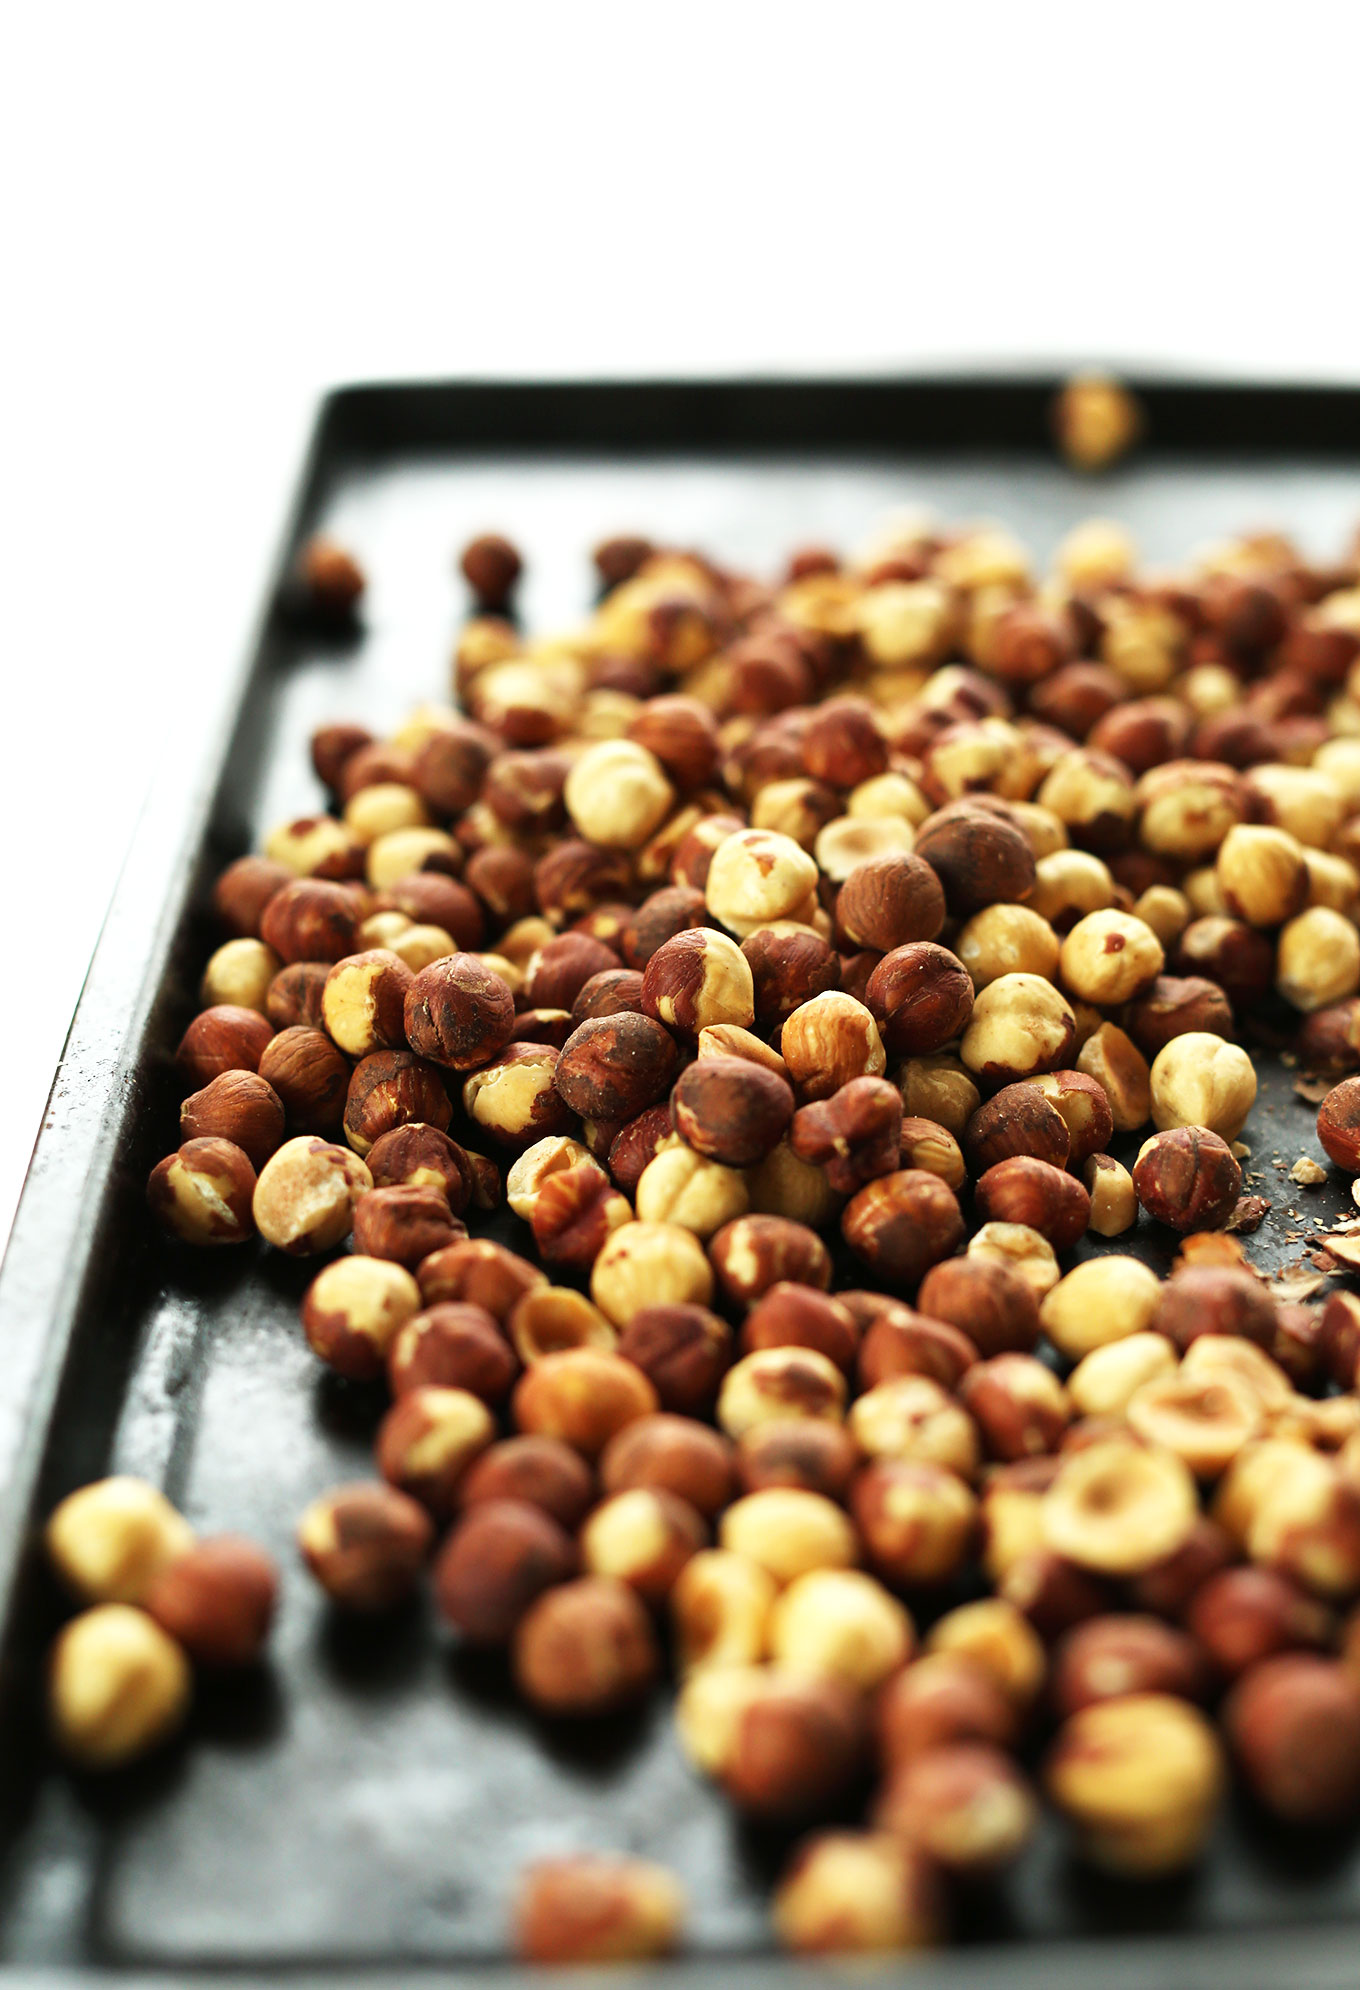 Roasting hazelnuts on a baking sheet for making homemade healthy nutella